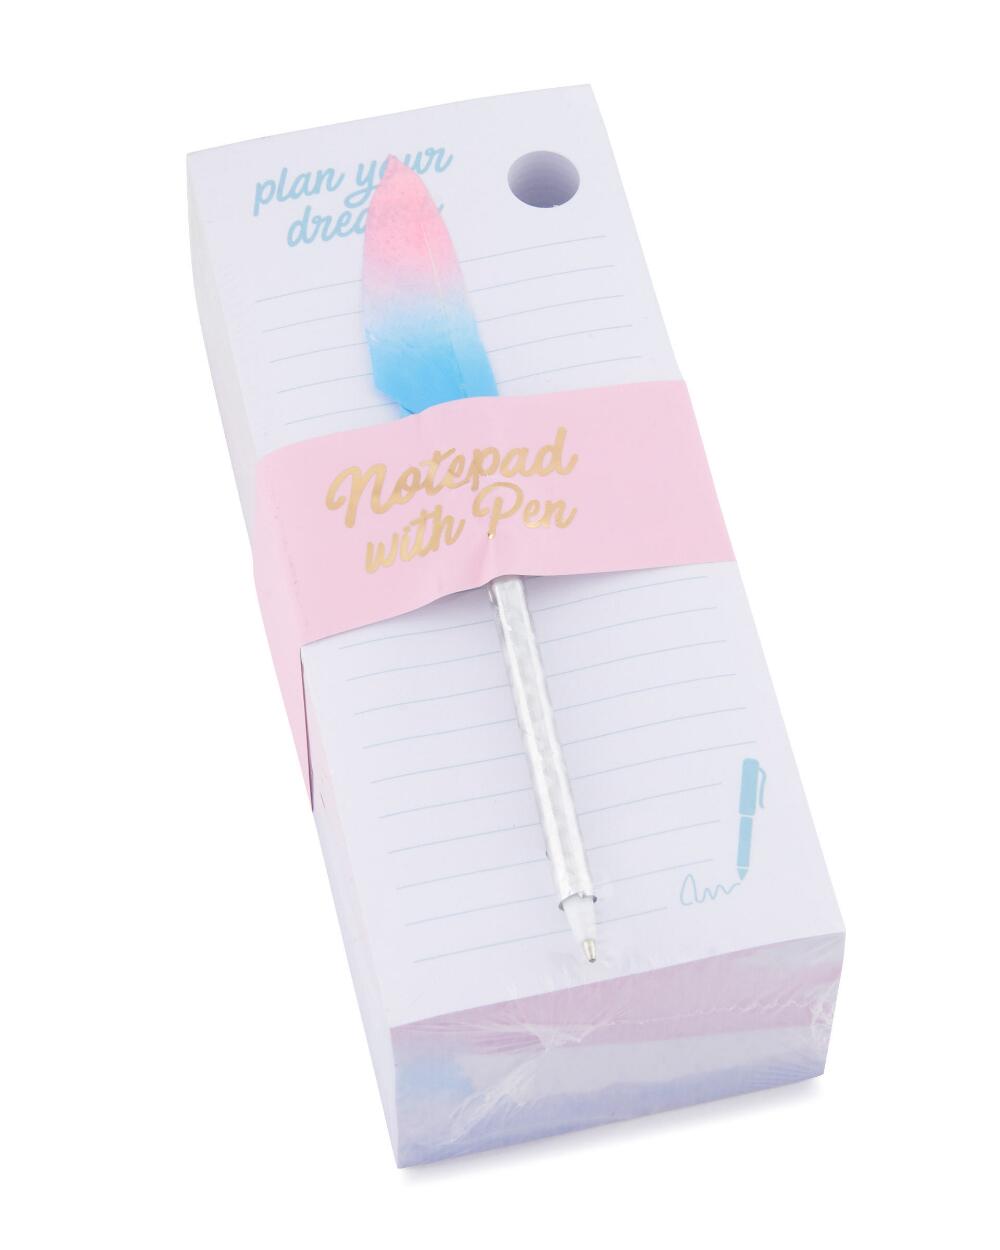 Notepad and pen set from Stein Mart